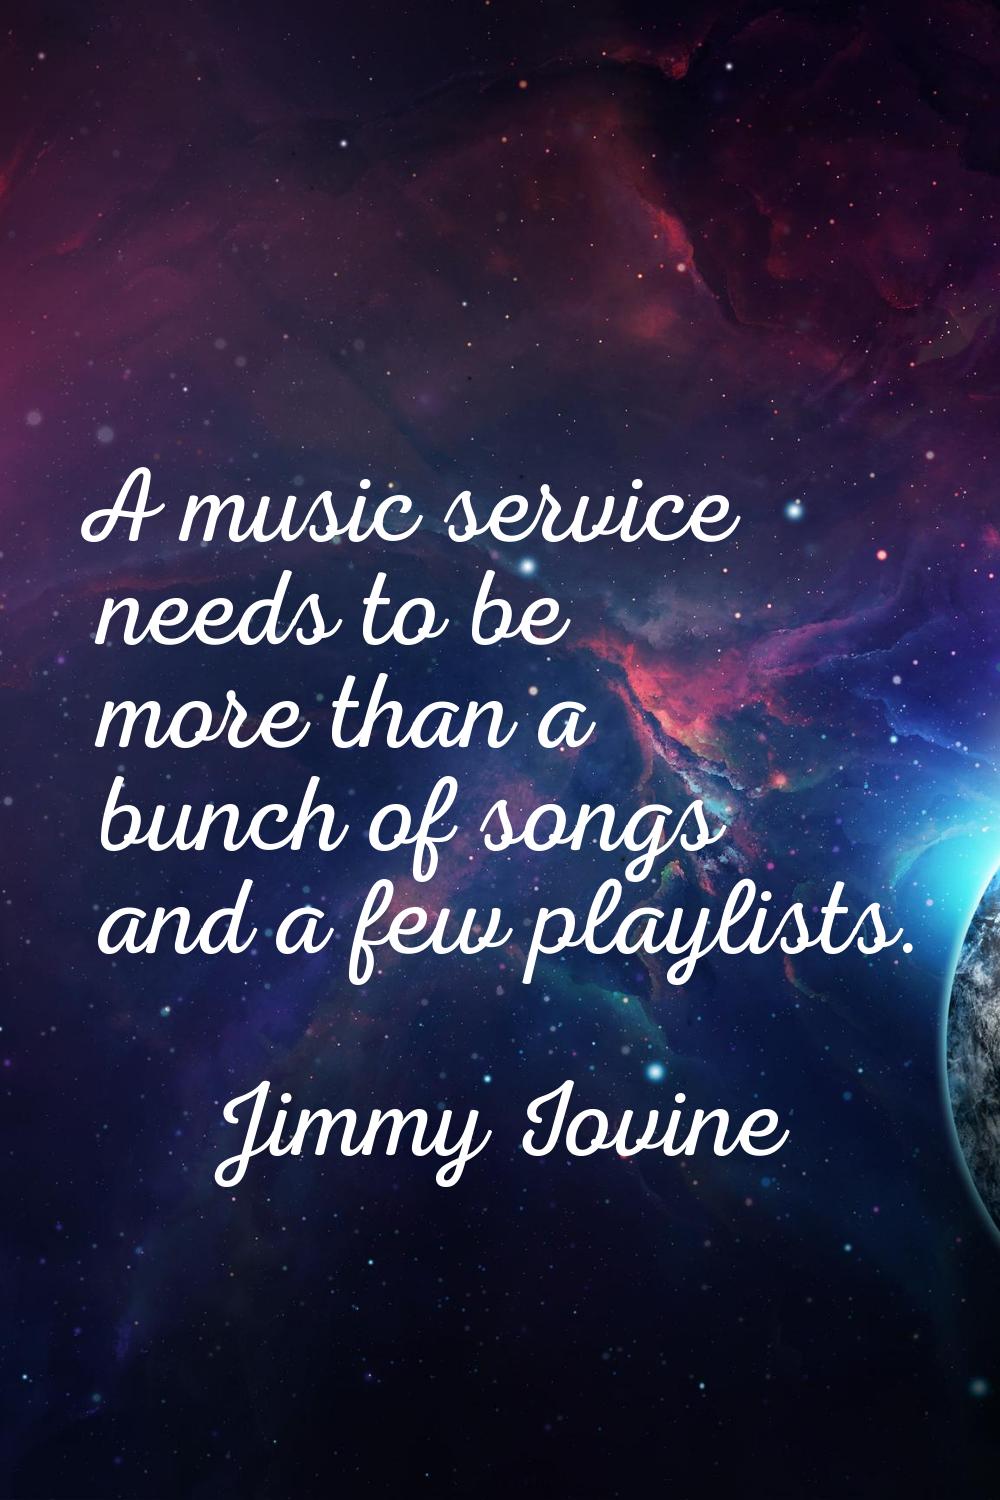 A music service needs to be more than a bunch of songs and a few playlists.